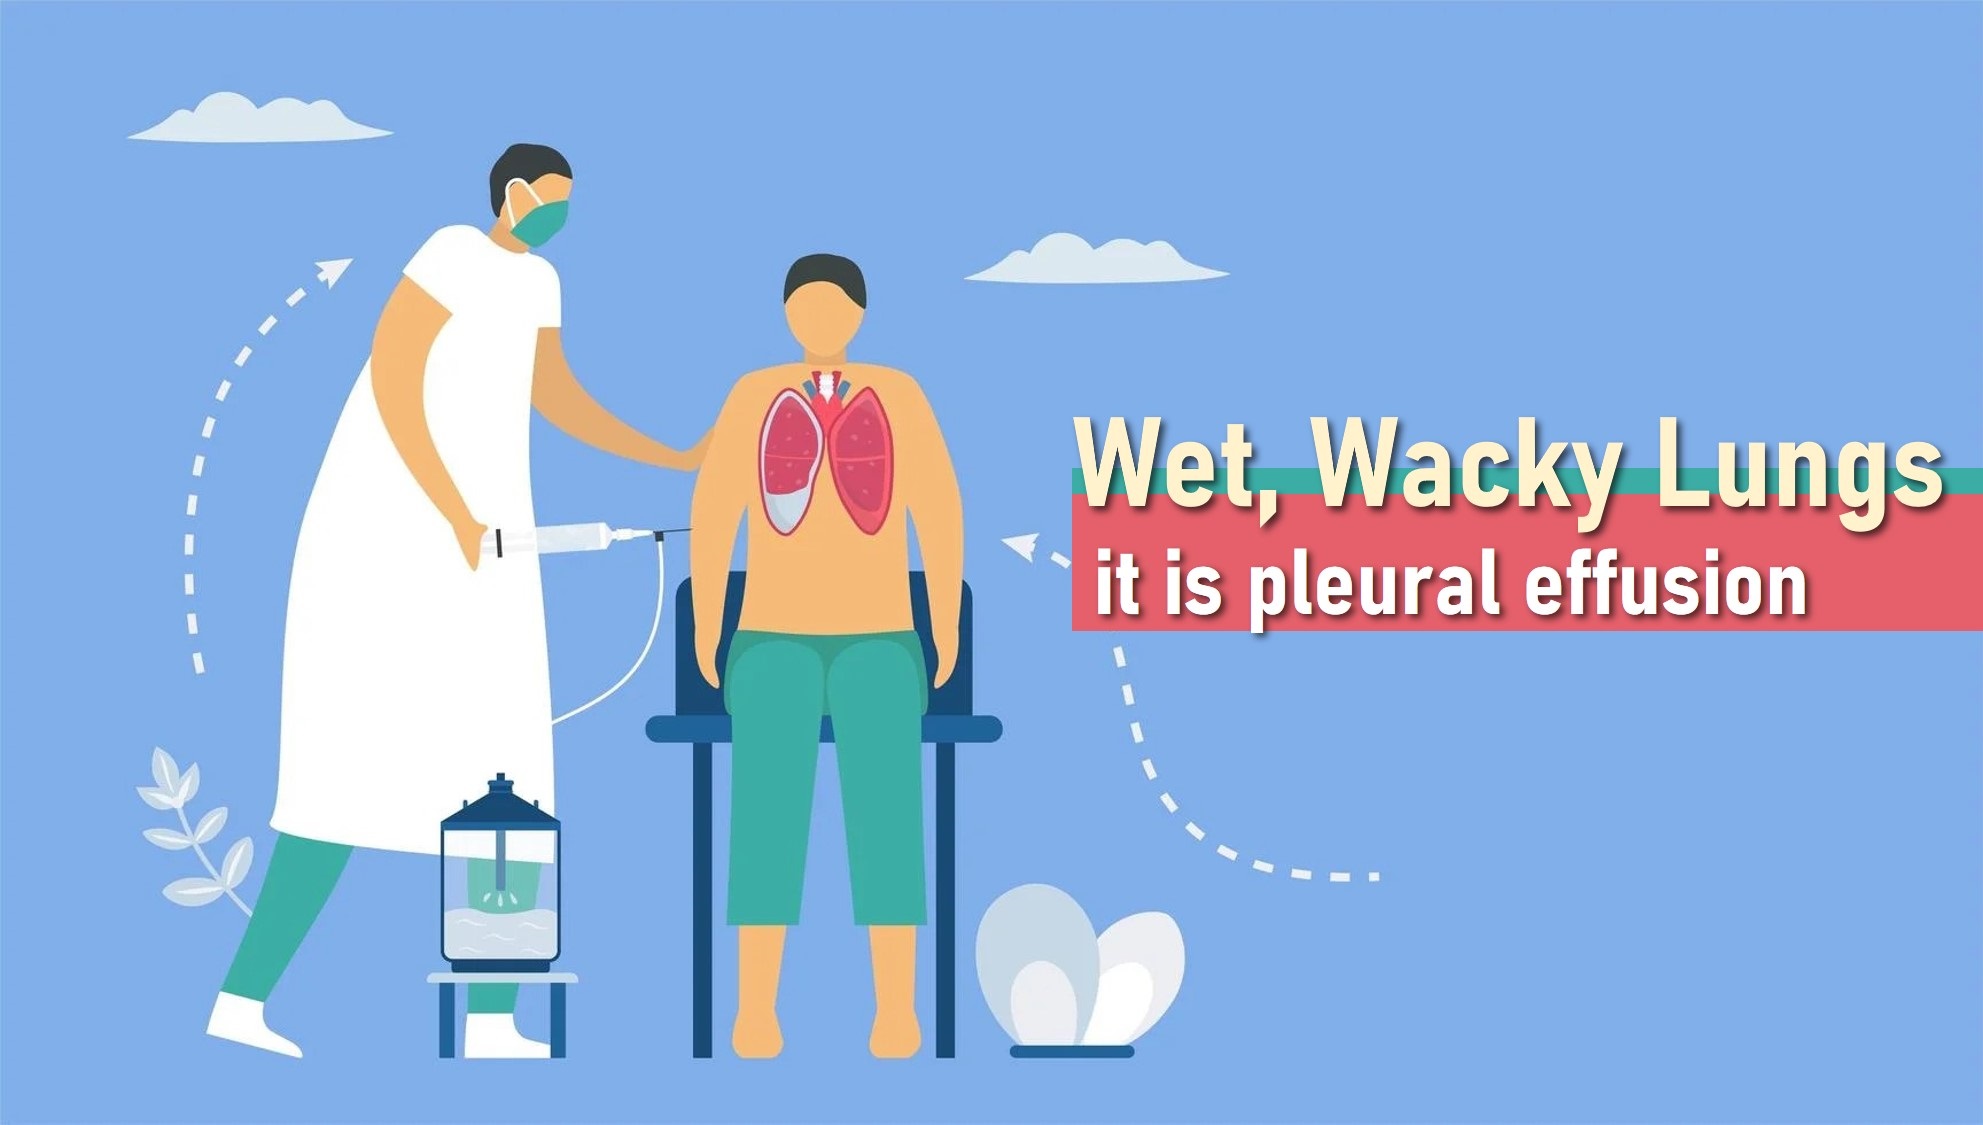 Wet, Wacky Lungs: What is Pleural Effusion?